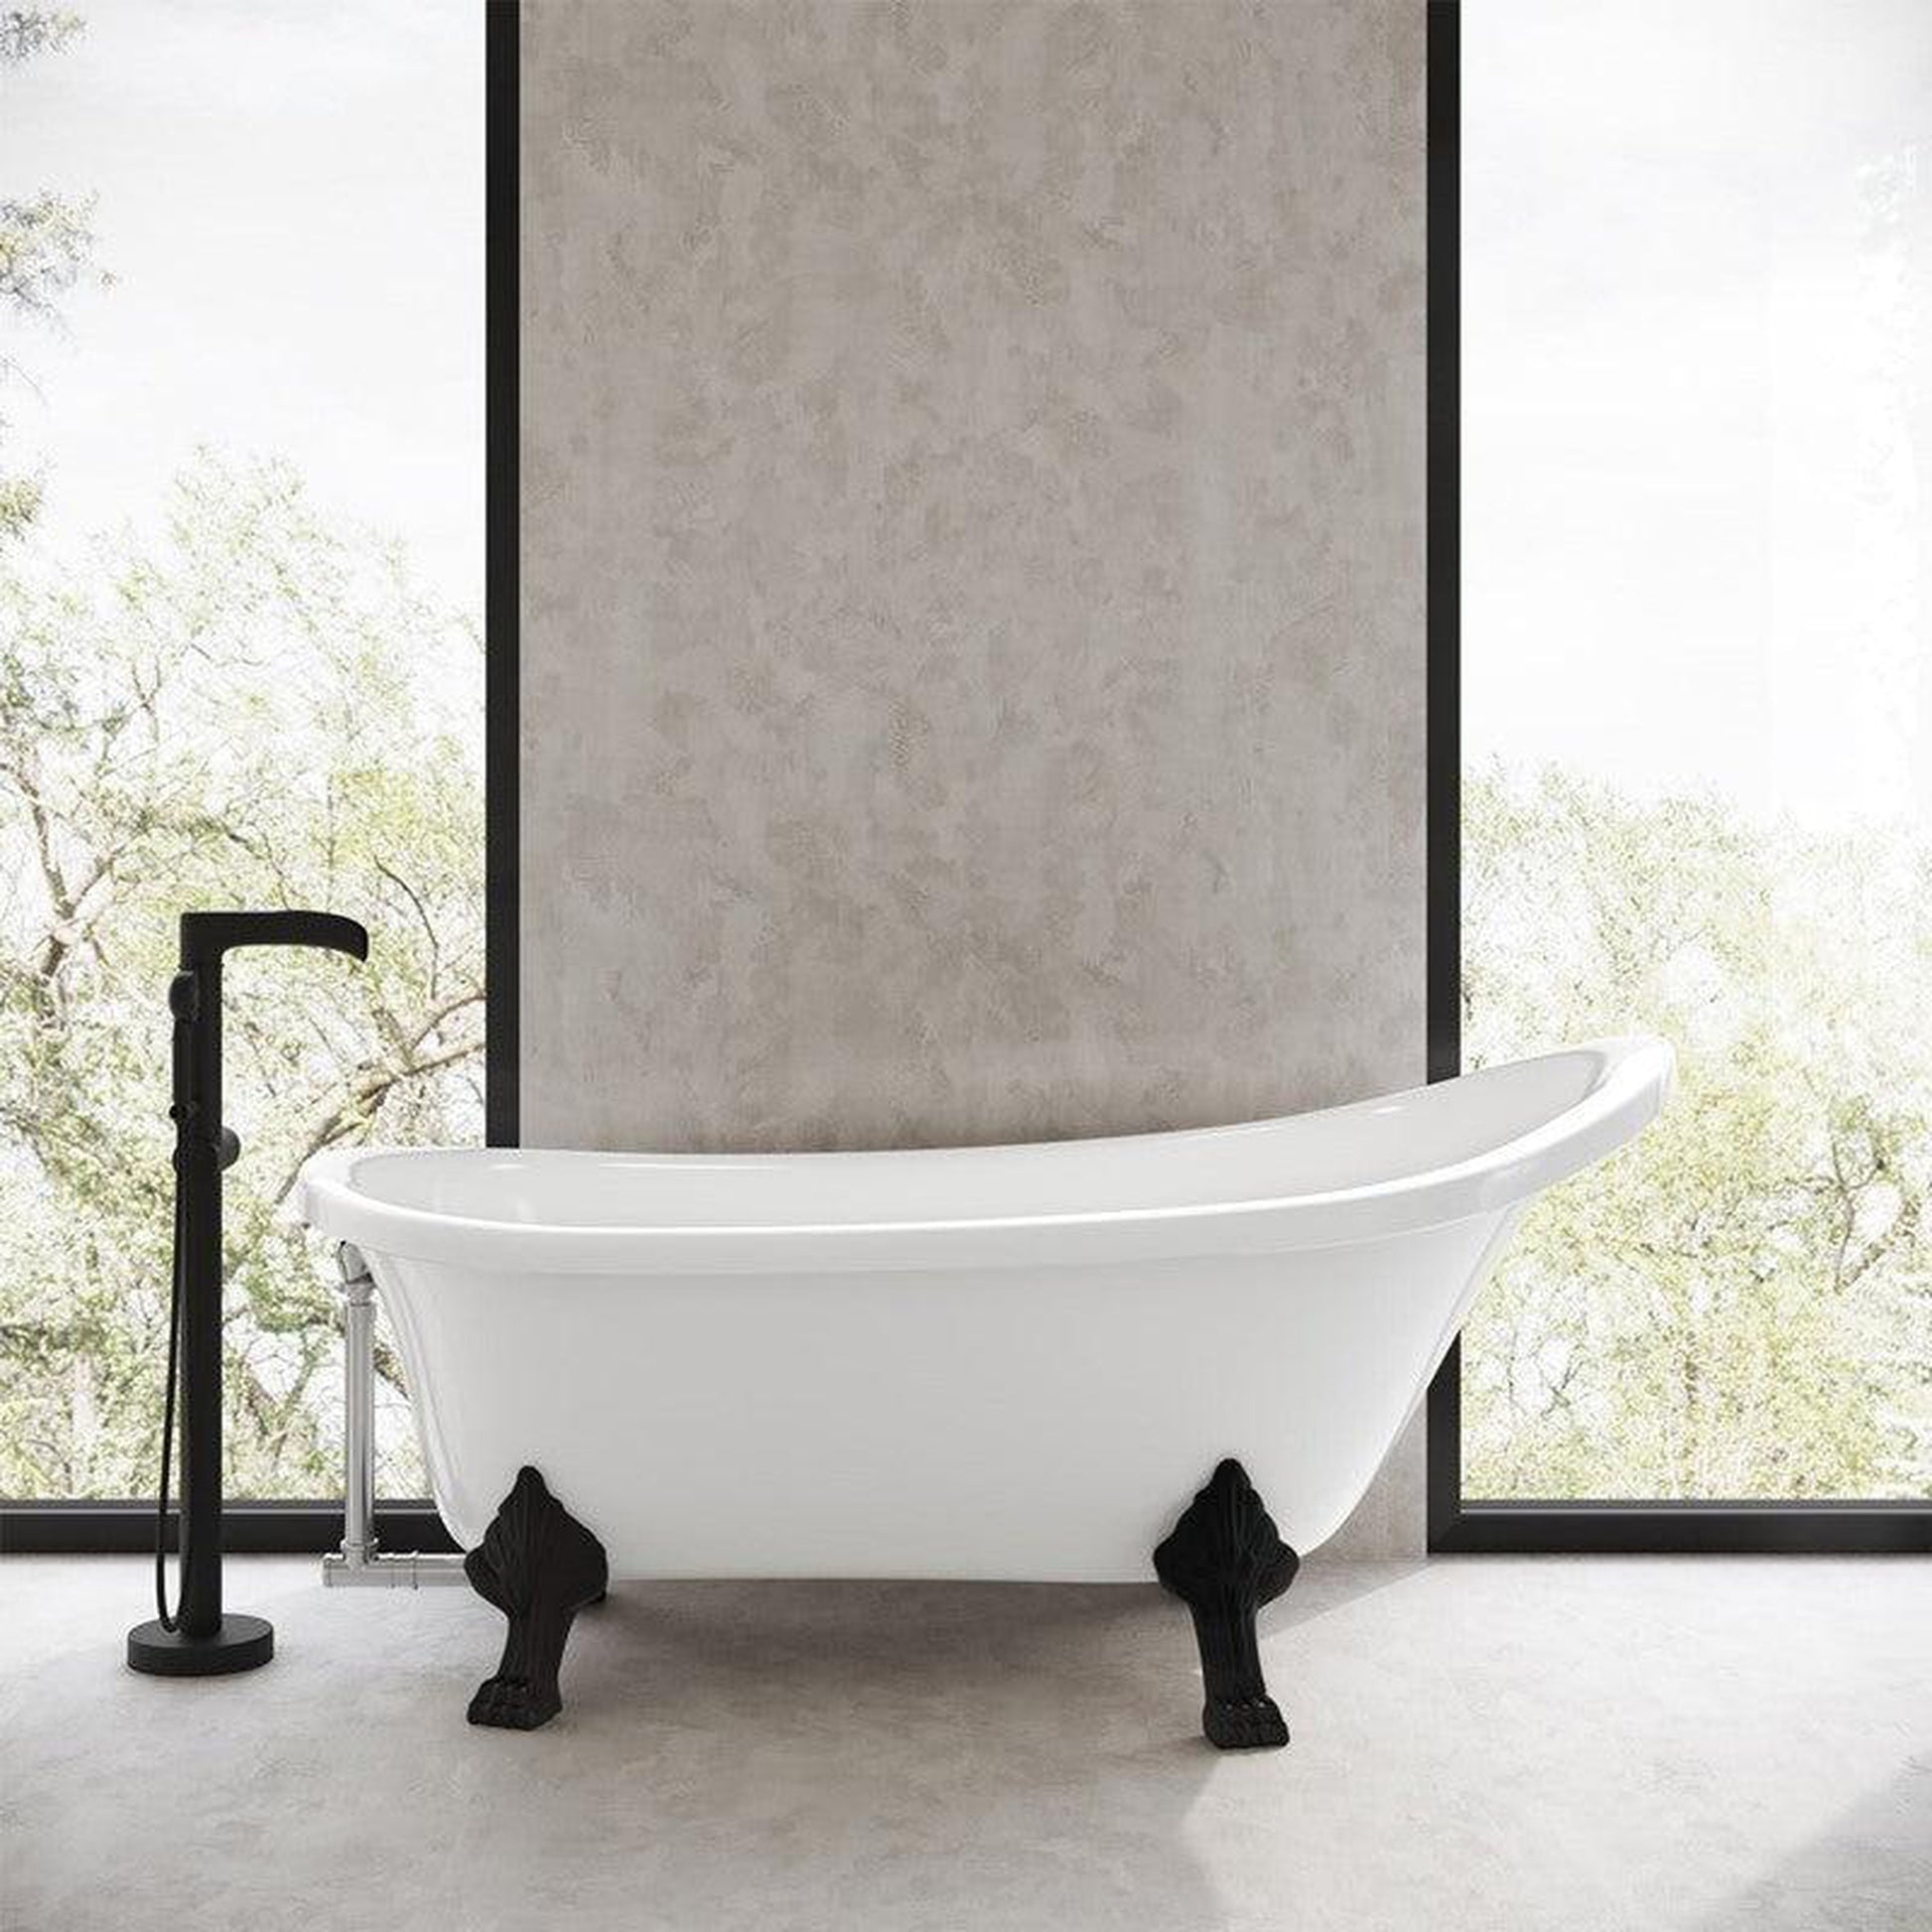 Swiss Madison Caché 63" x 29" White Right-Hand Drain Freestanding Bathtub With Adjustable Matte Black Clawfoot Feet, Overflow Kit and Pop-Up Drain